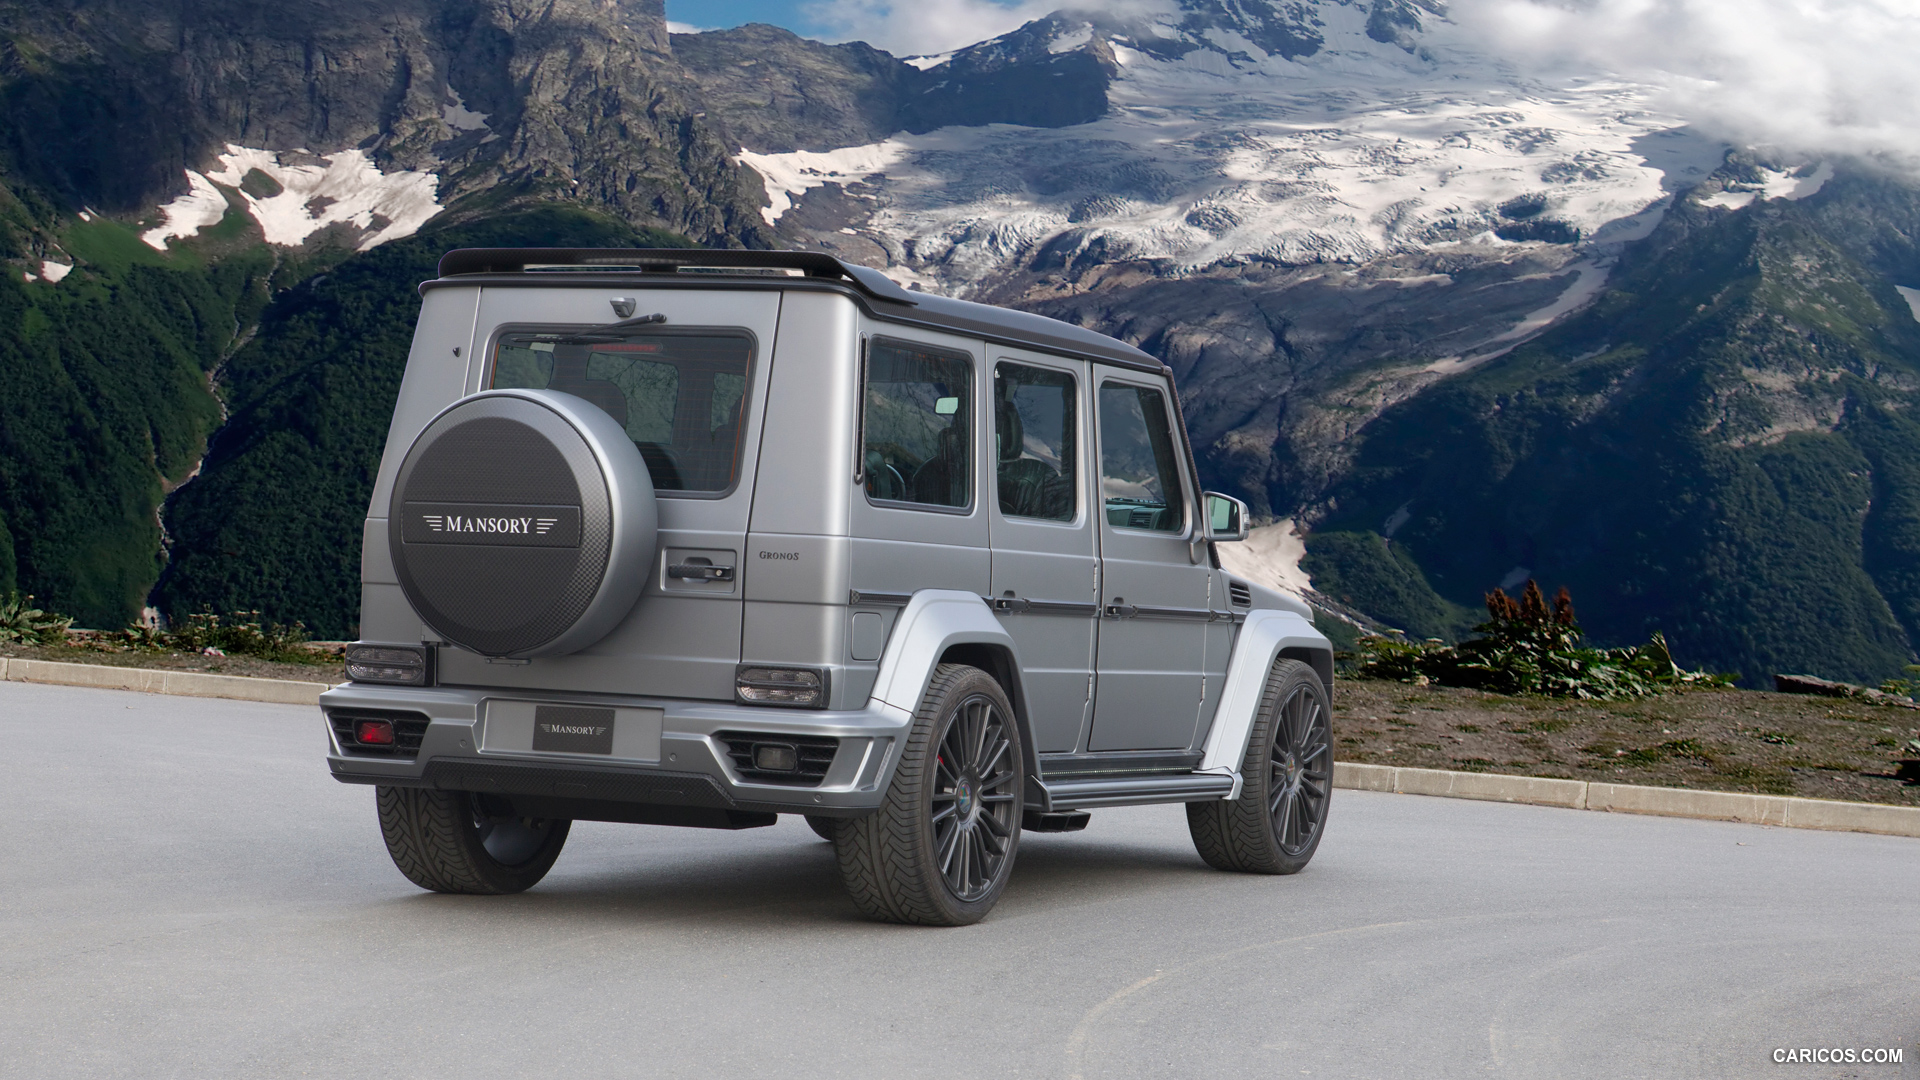 2014 Mansory Gronos based on Mercedes-Benz G-Class AMG  - Rear, #2 of 6